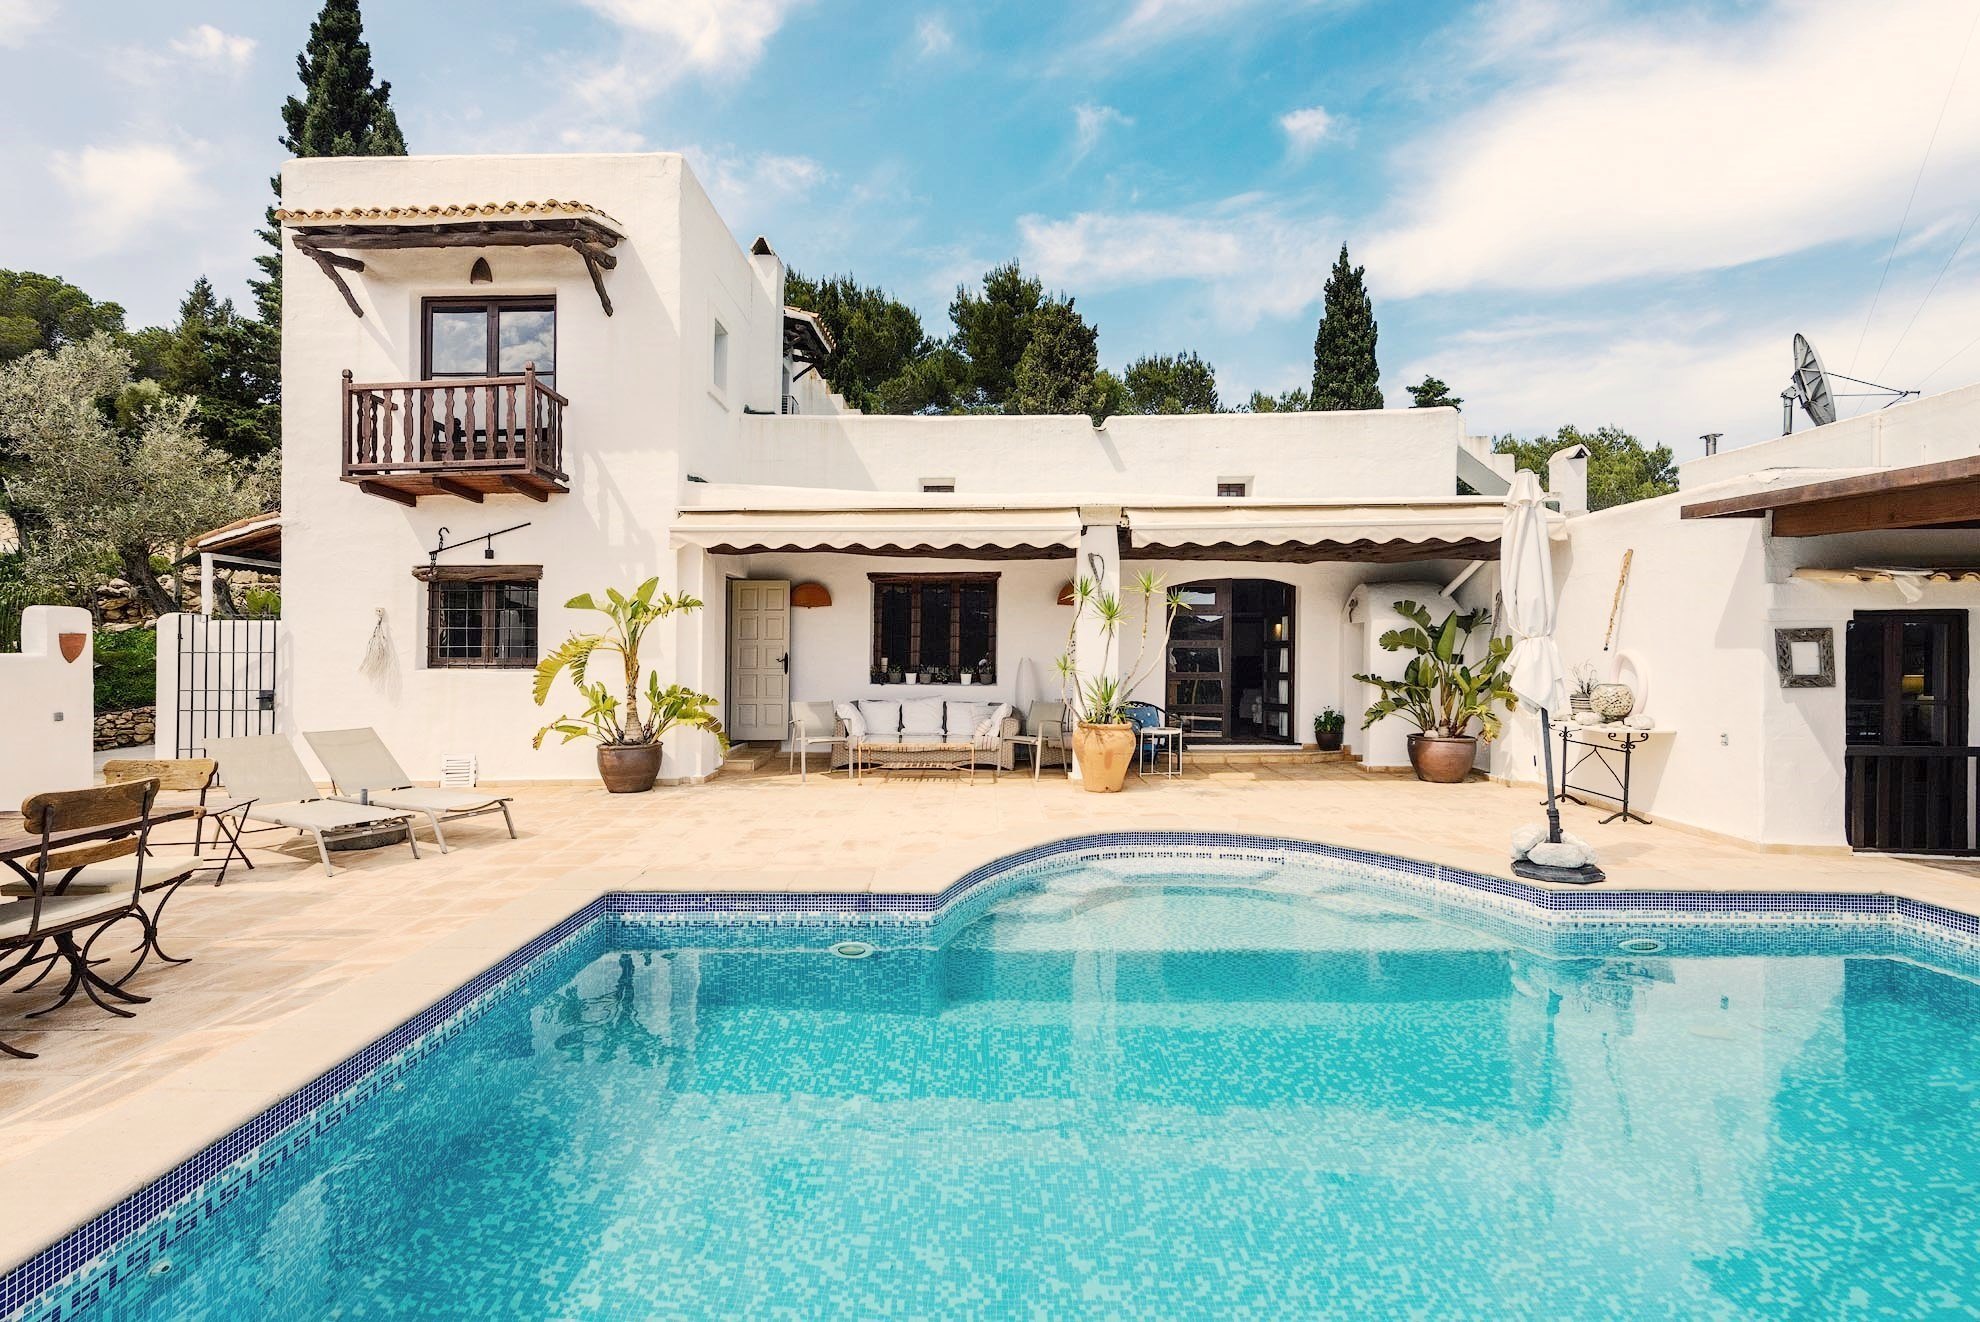 Spacious and bright villa in traditional Ibizan style with excellent views